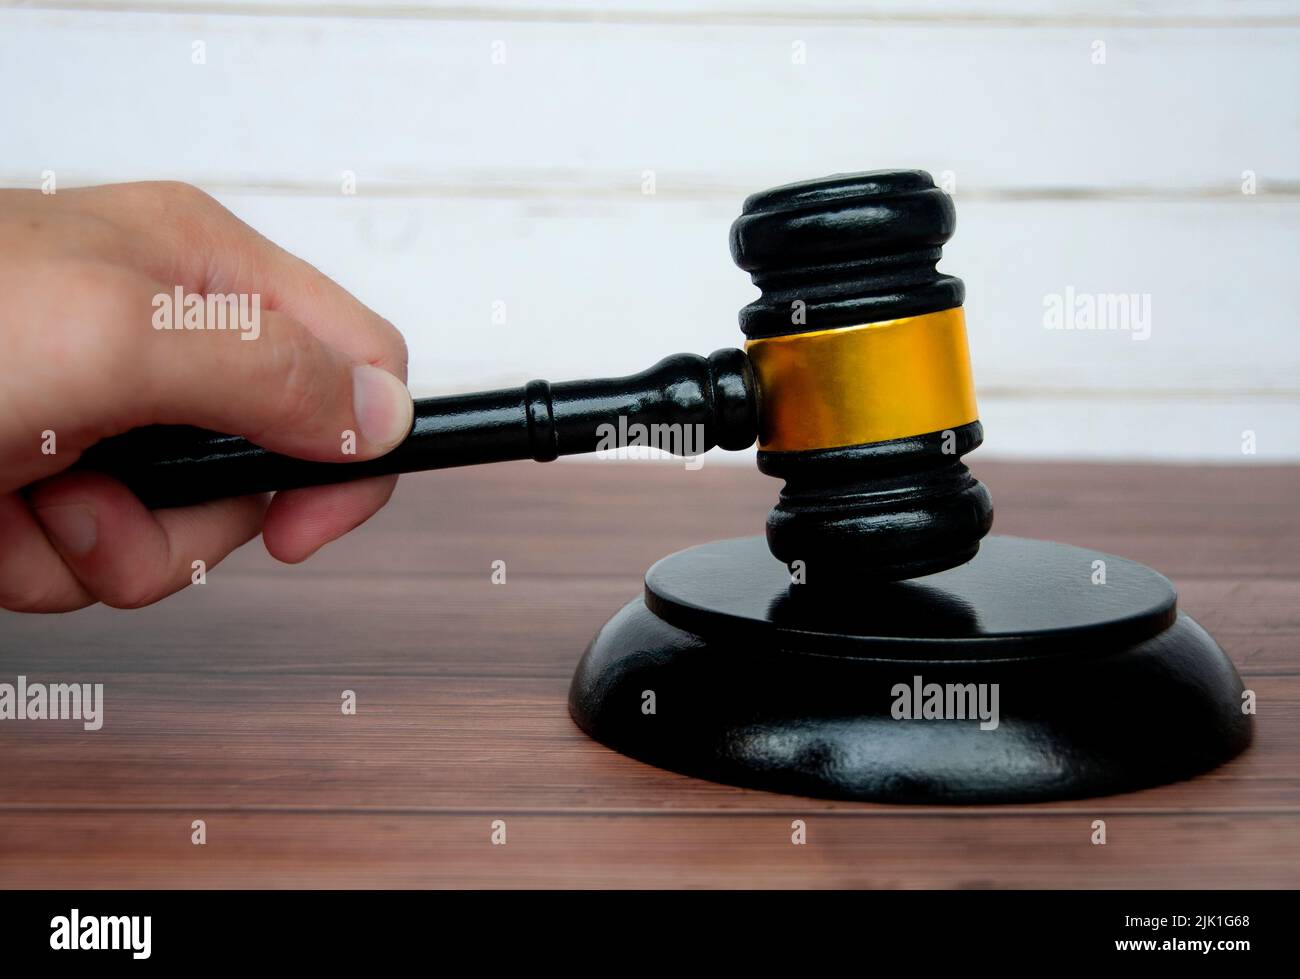 Hand holding lawyer gavel on wooden table background. Law and order concept Stock Photo